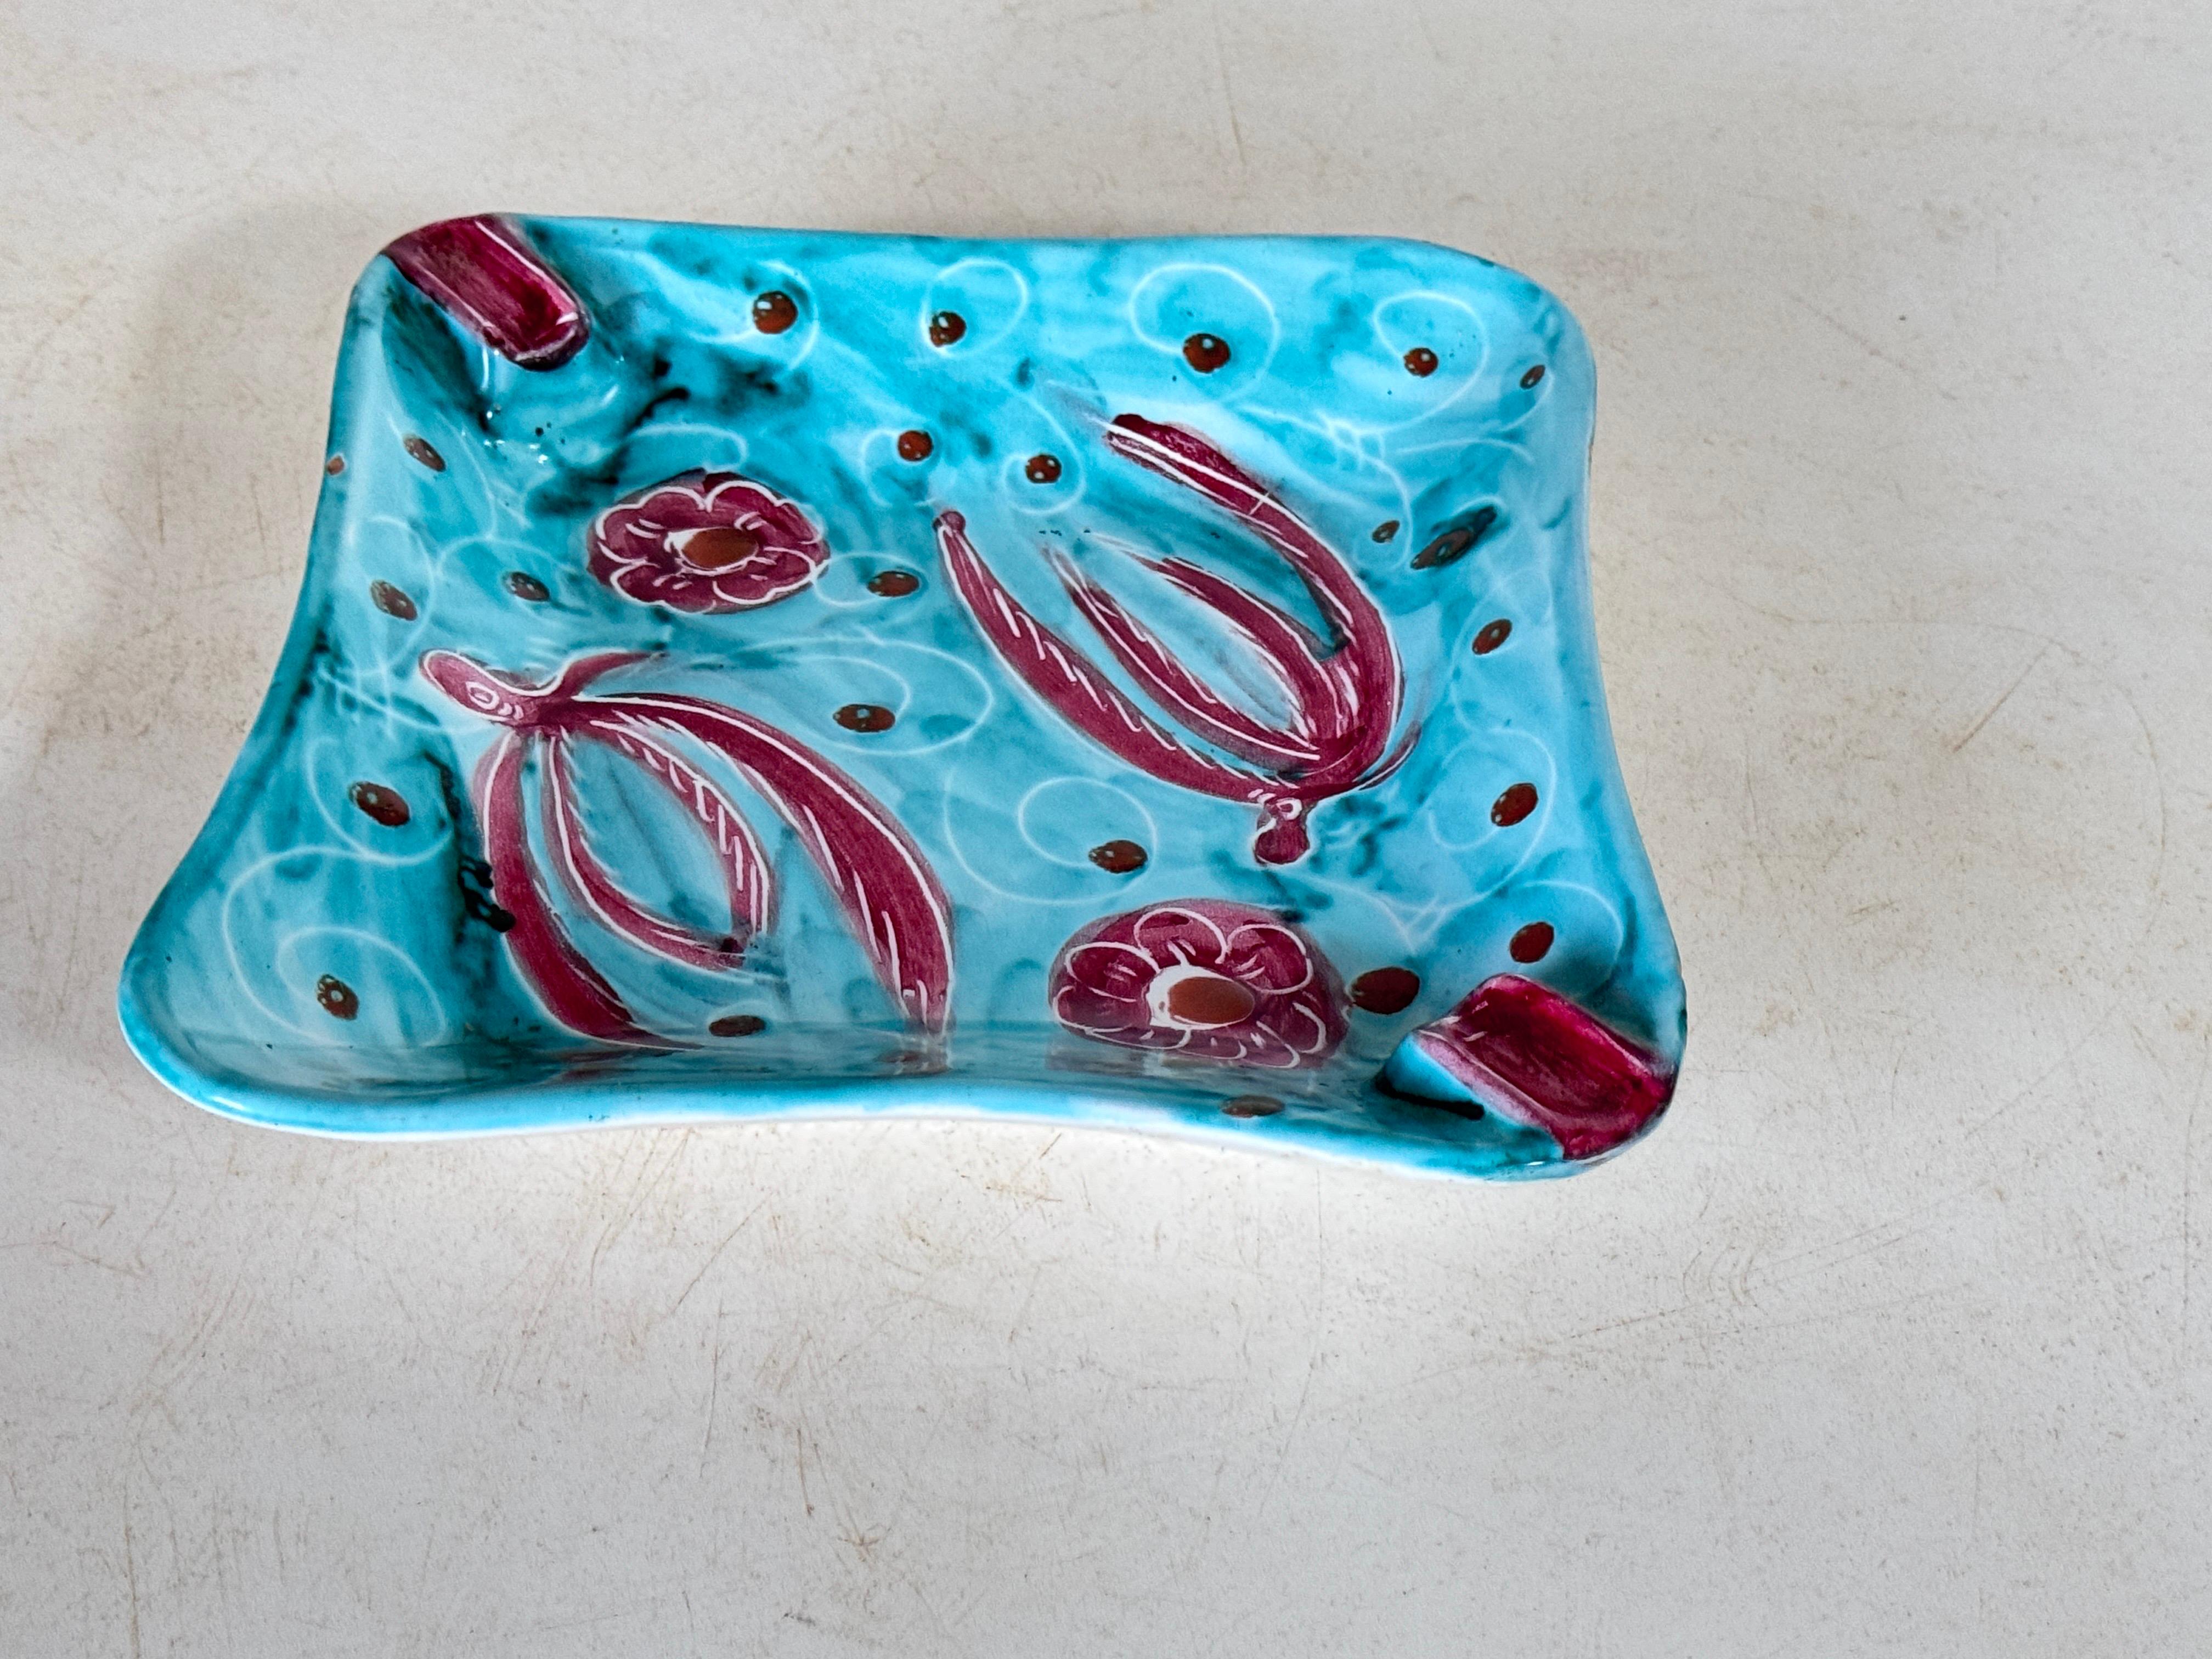 Ceramic Blue and Red Ashtray or Vide Poche Circa 1960 Italy Signed PM Italy For Sale 5